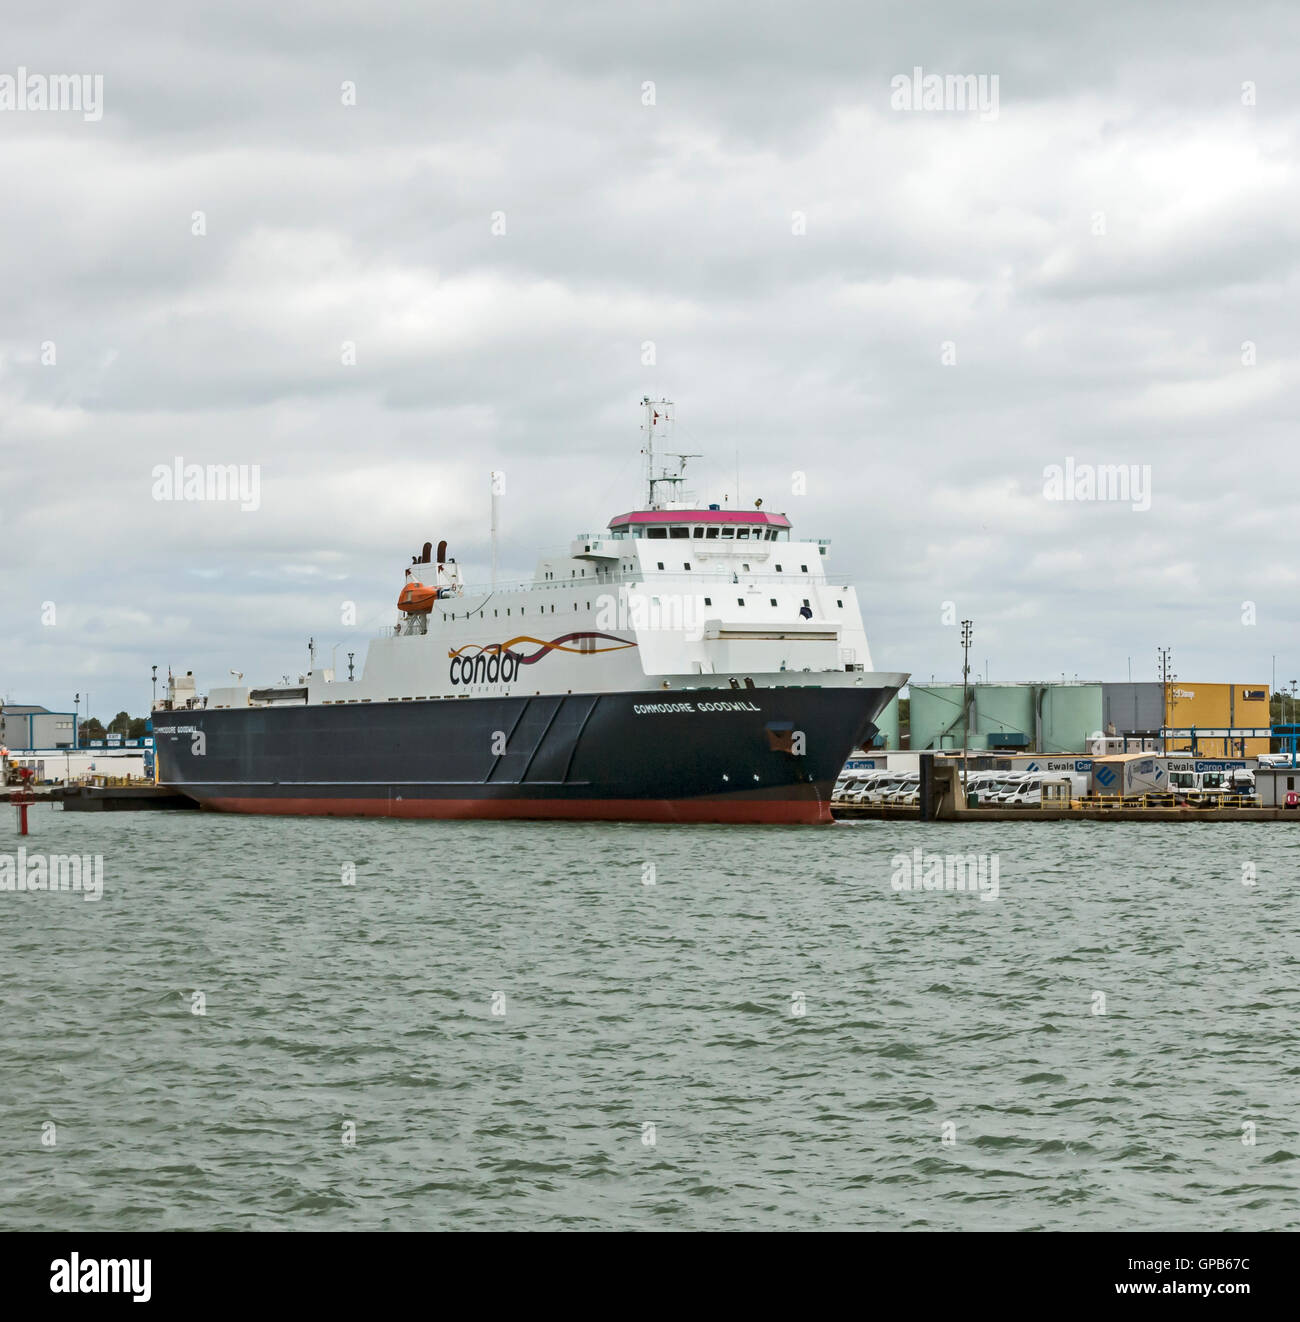 Condor Ferries Commodore Goodwill moored in Portsmouth harbour Portsmouth England Stock Photo